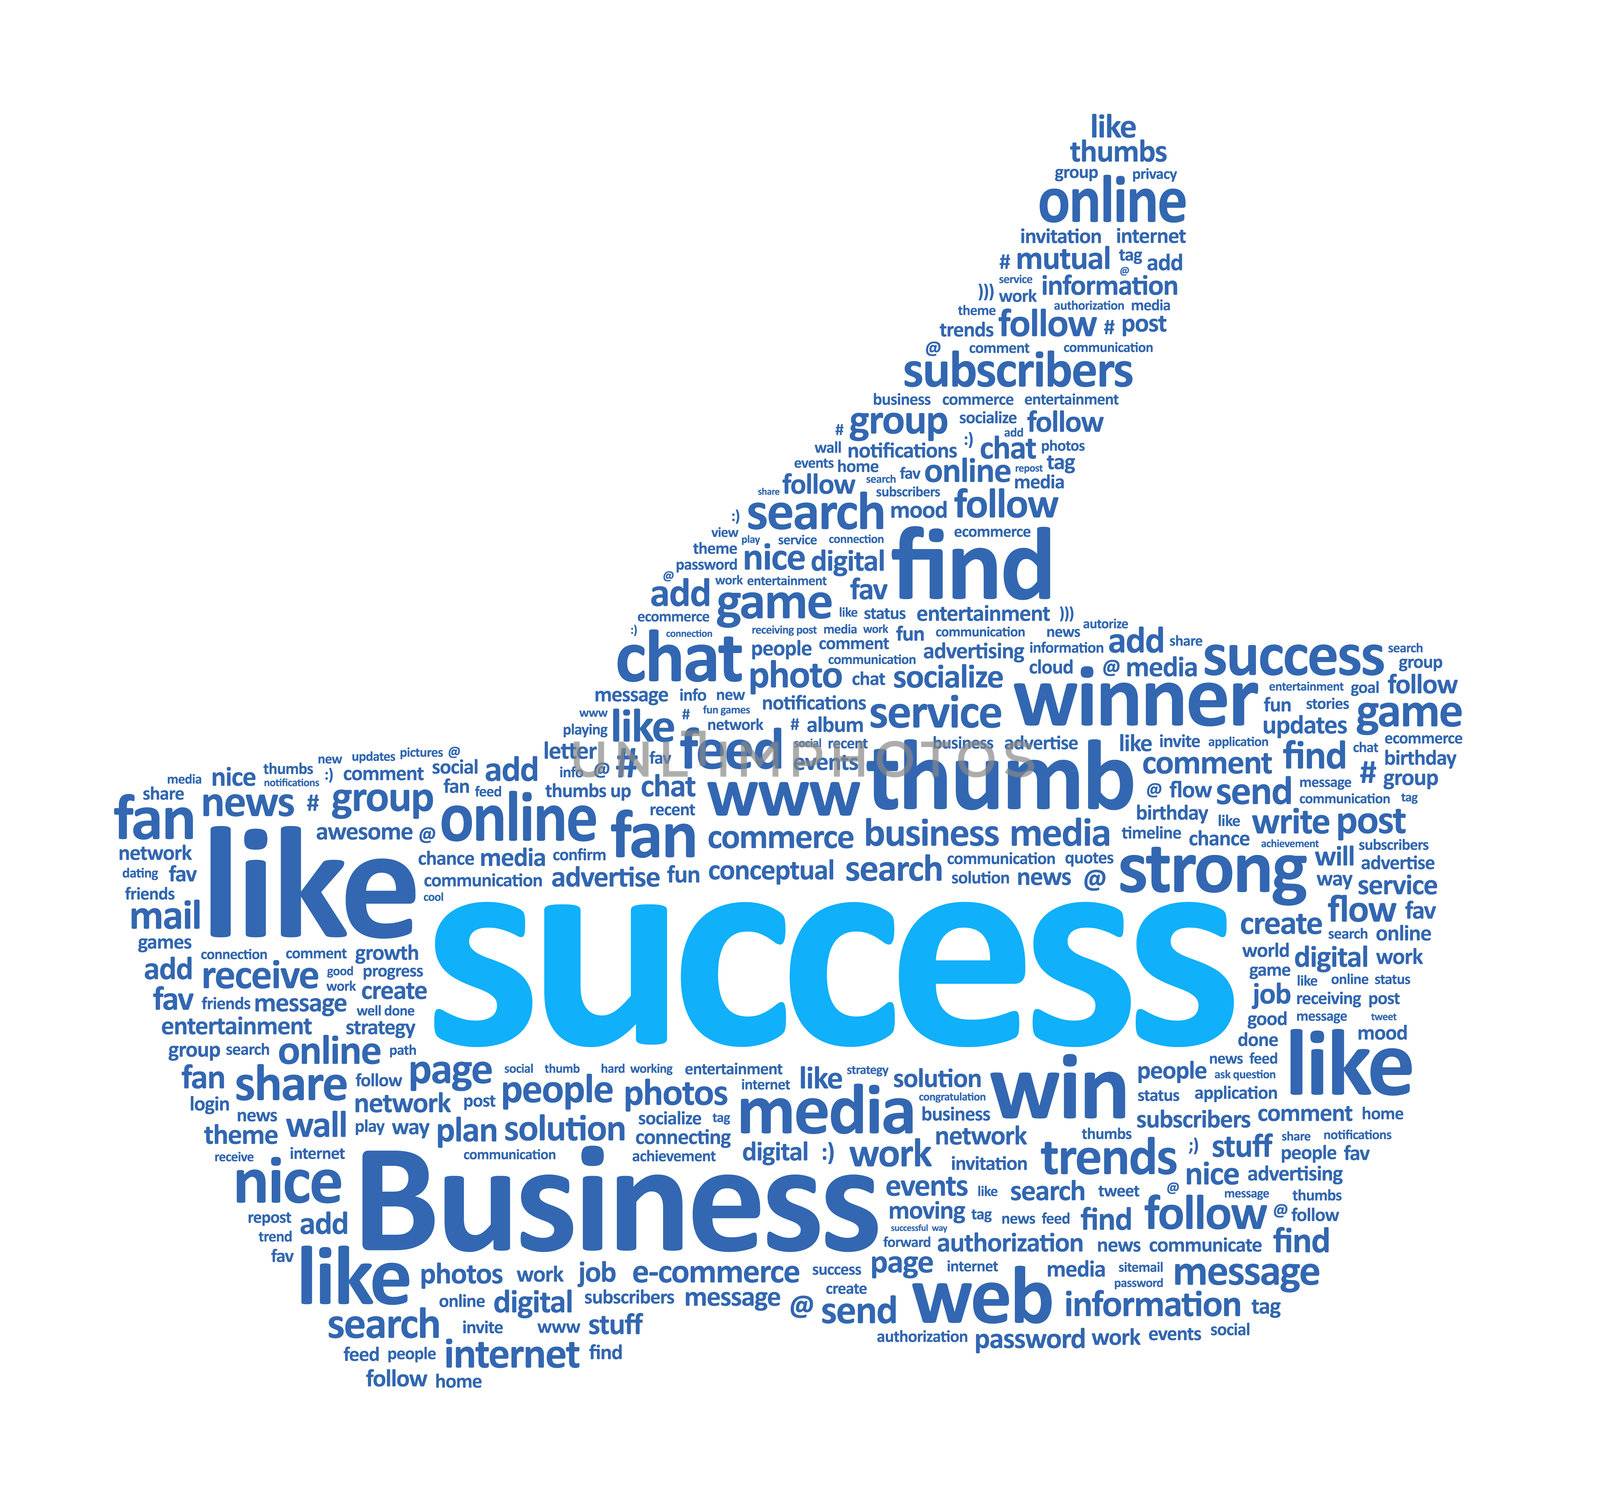  Success thumb up sign is made of various single words. Isolated on white.